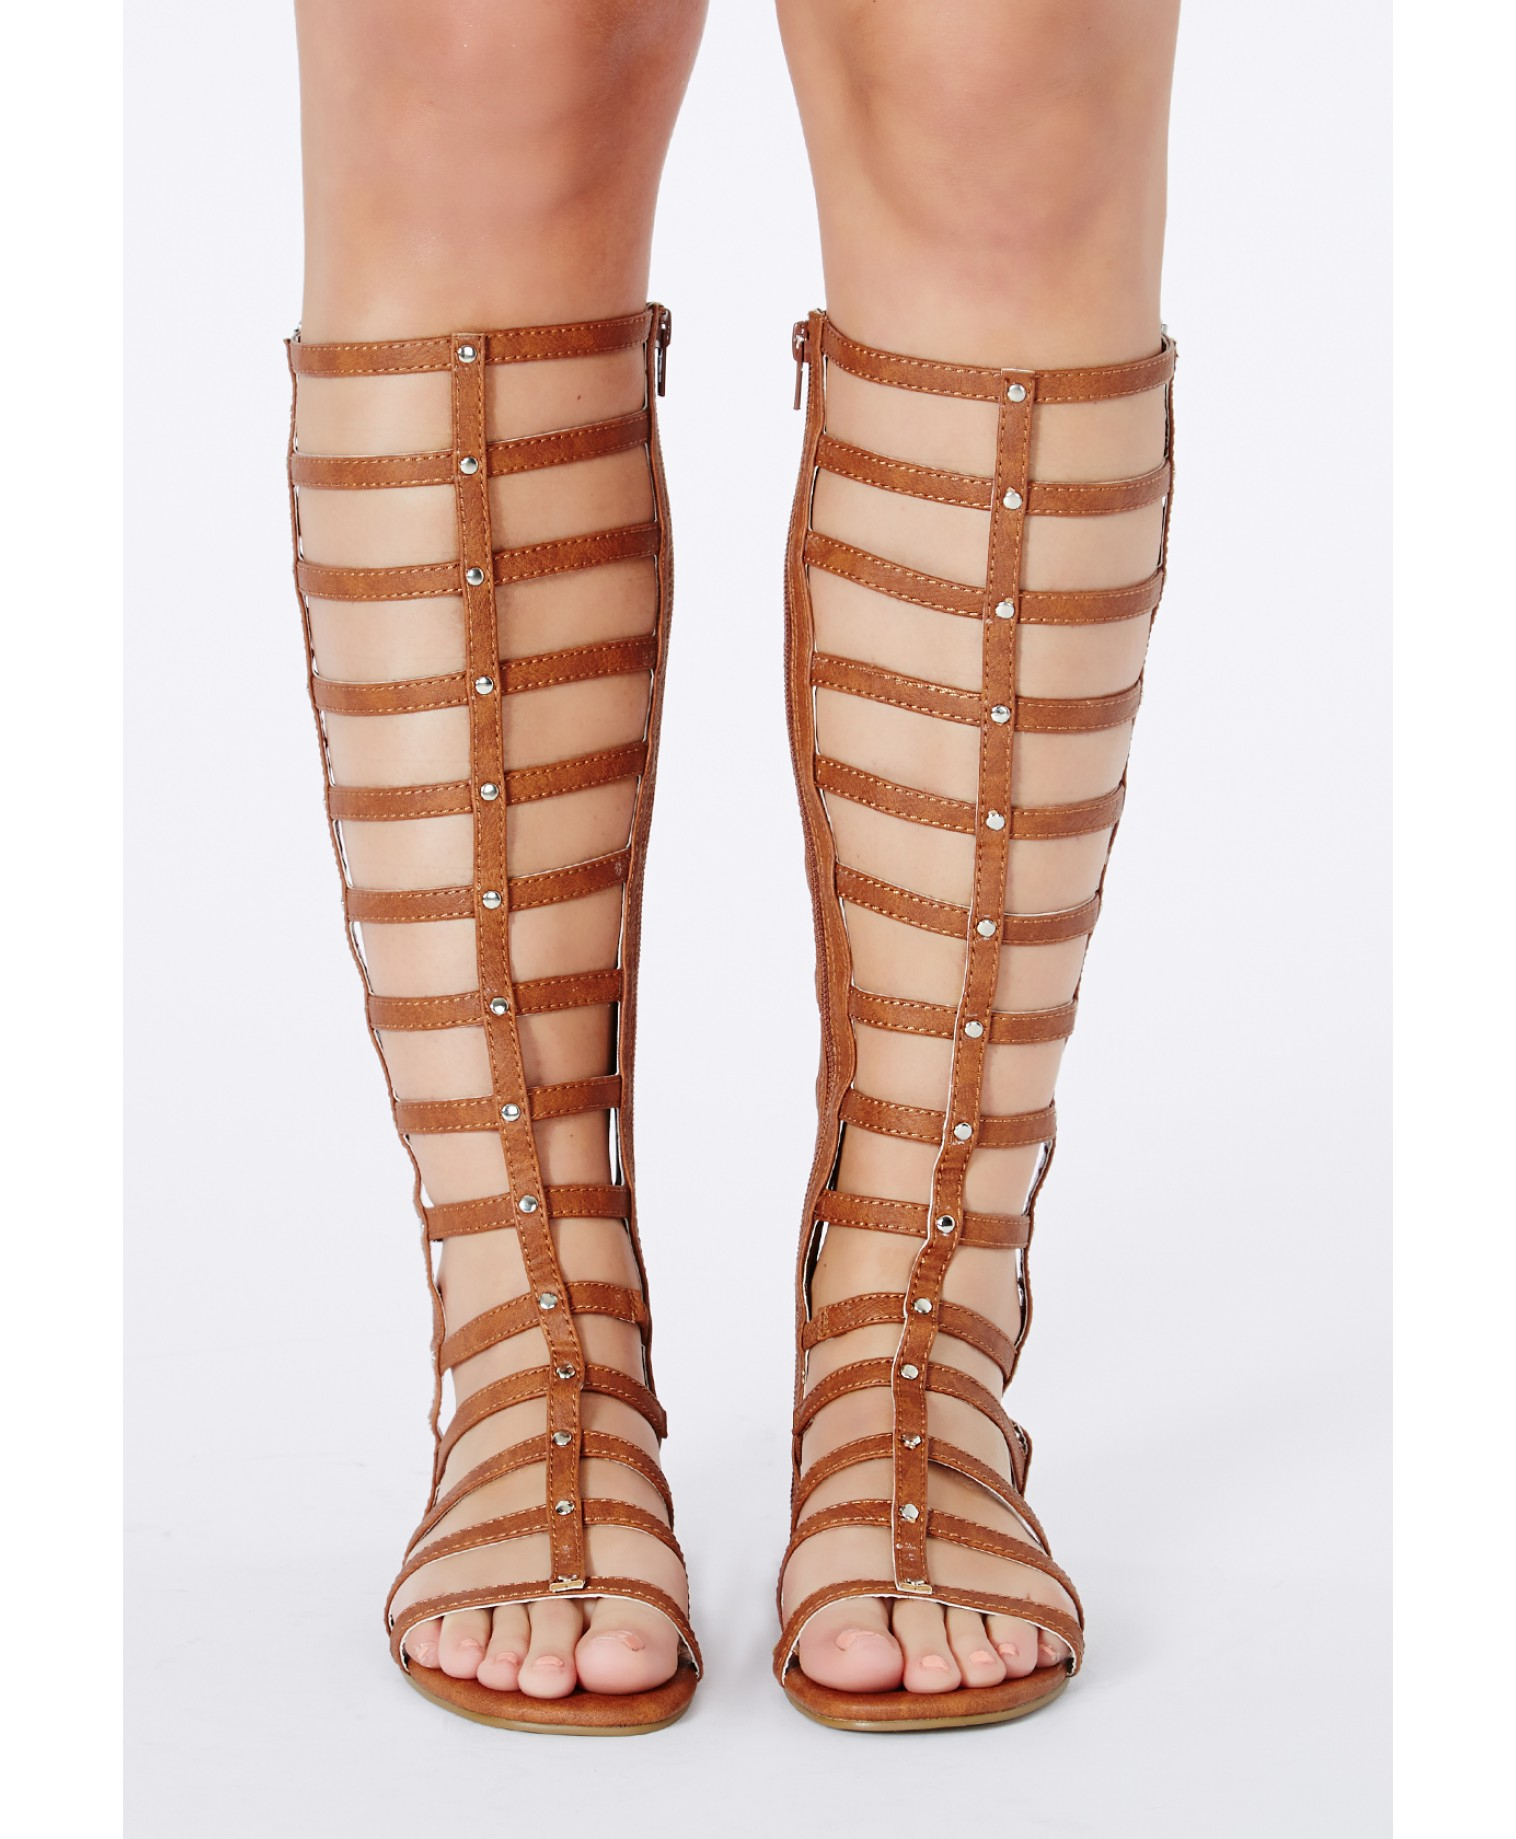 Missguided Kendy Metallic Caged Gladiator Sandals In Tan in Brown - Lyst